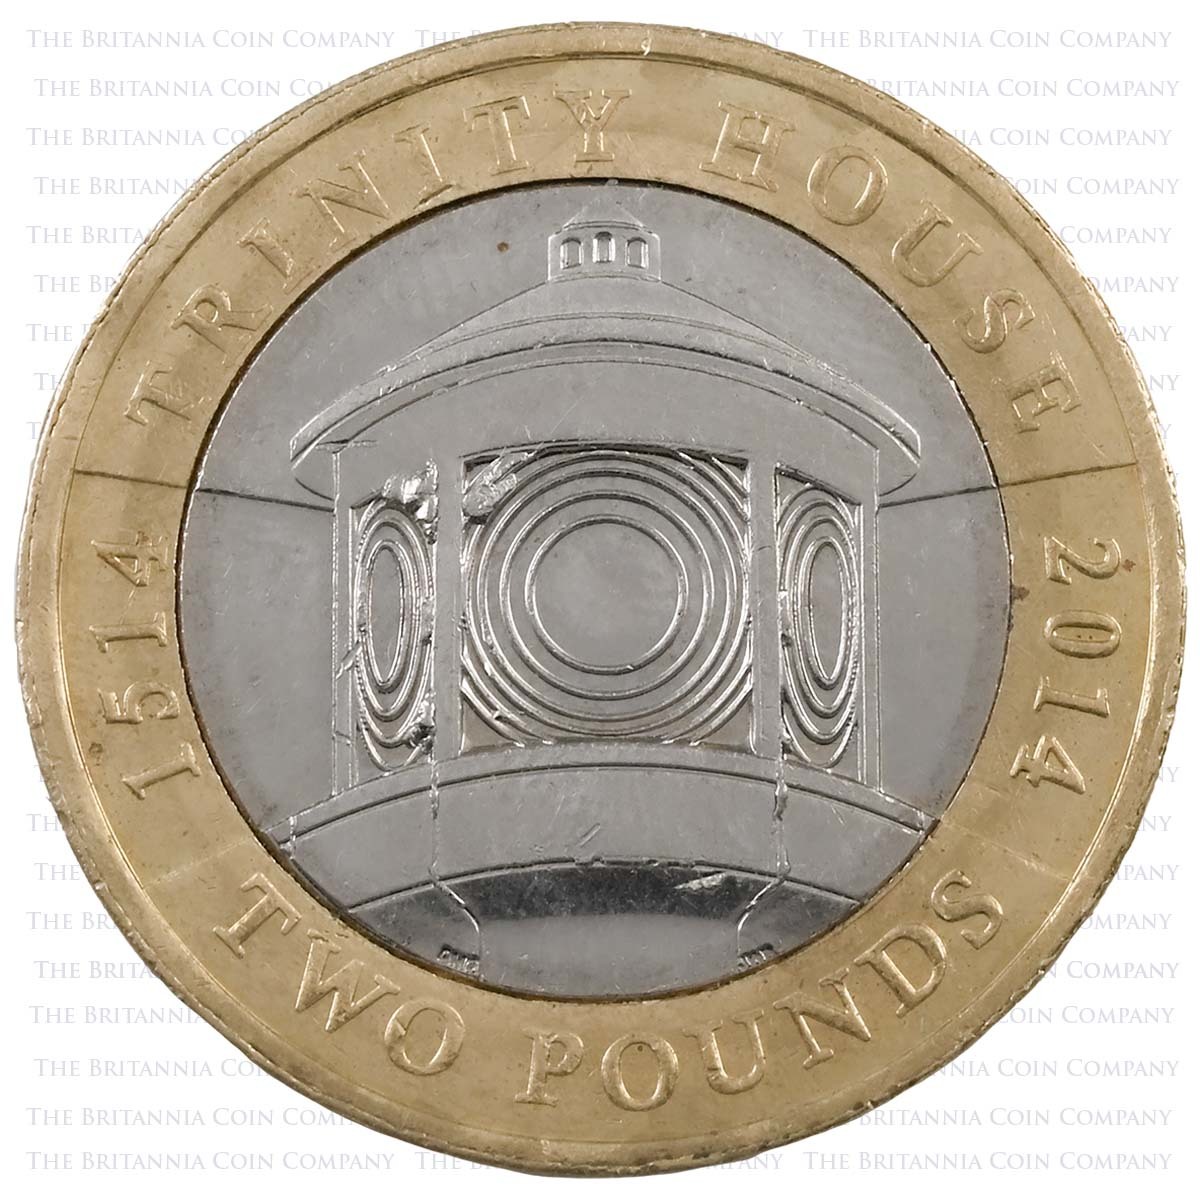 2014 Trinity House Lighthouse Circulated Two Pound Coin Reverse